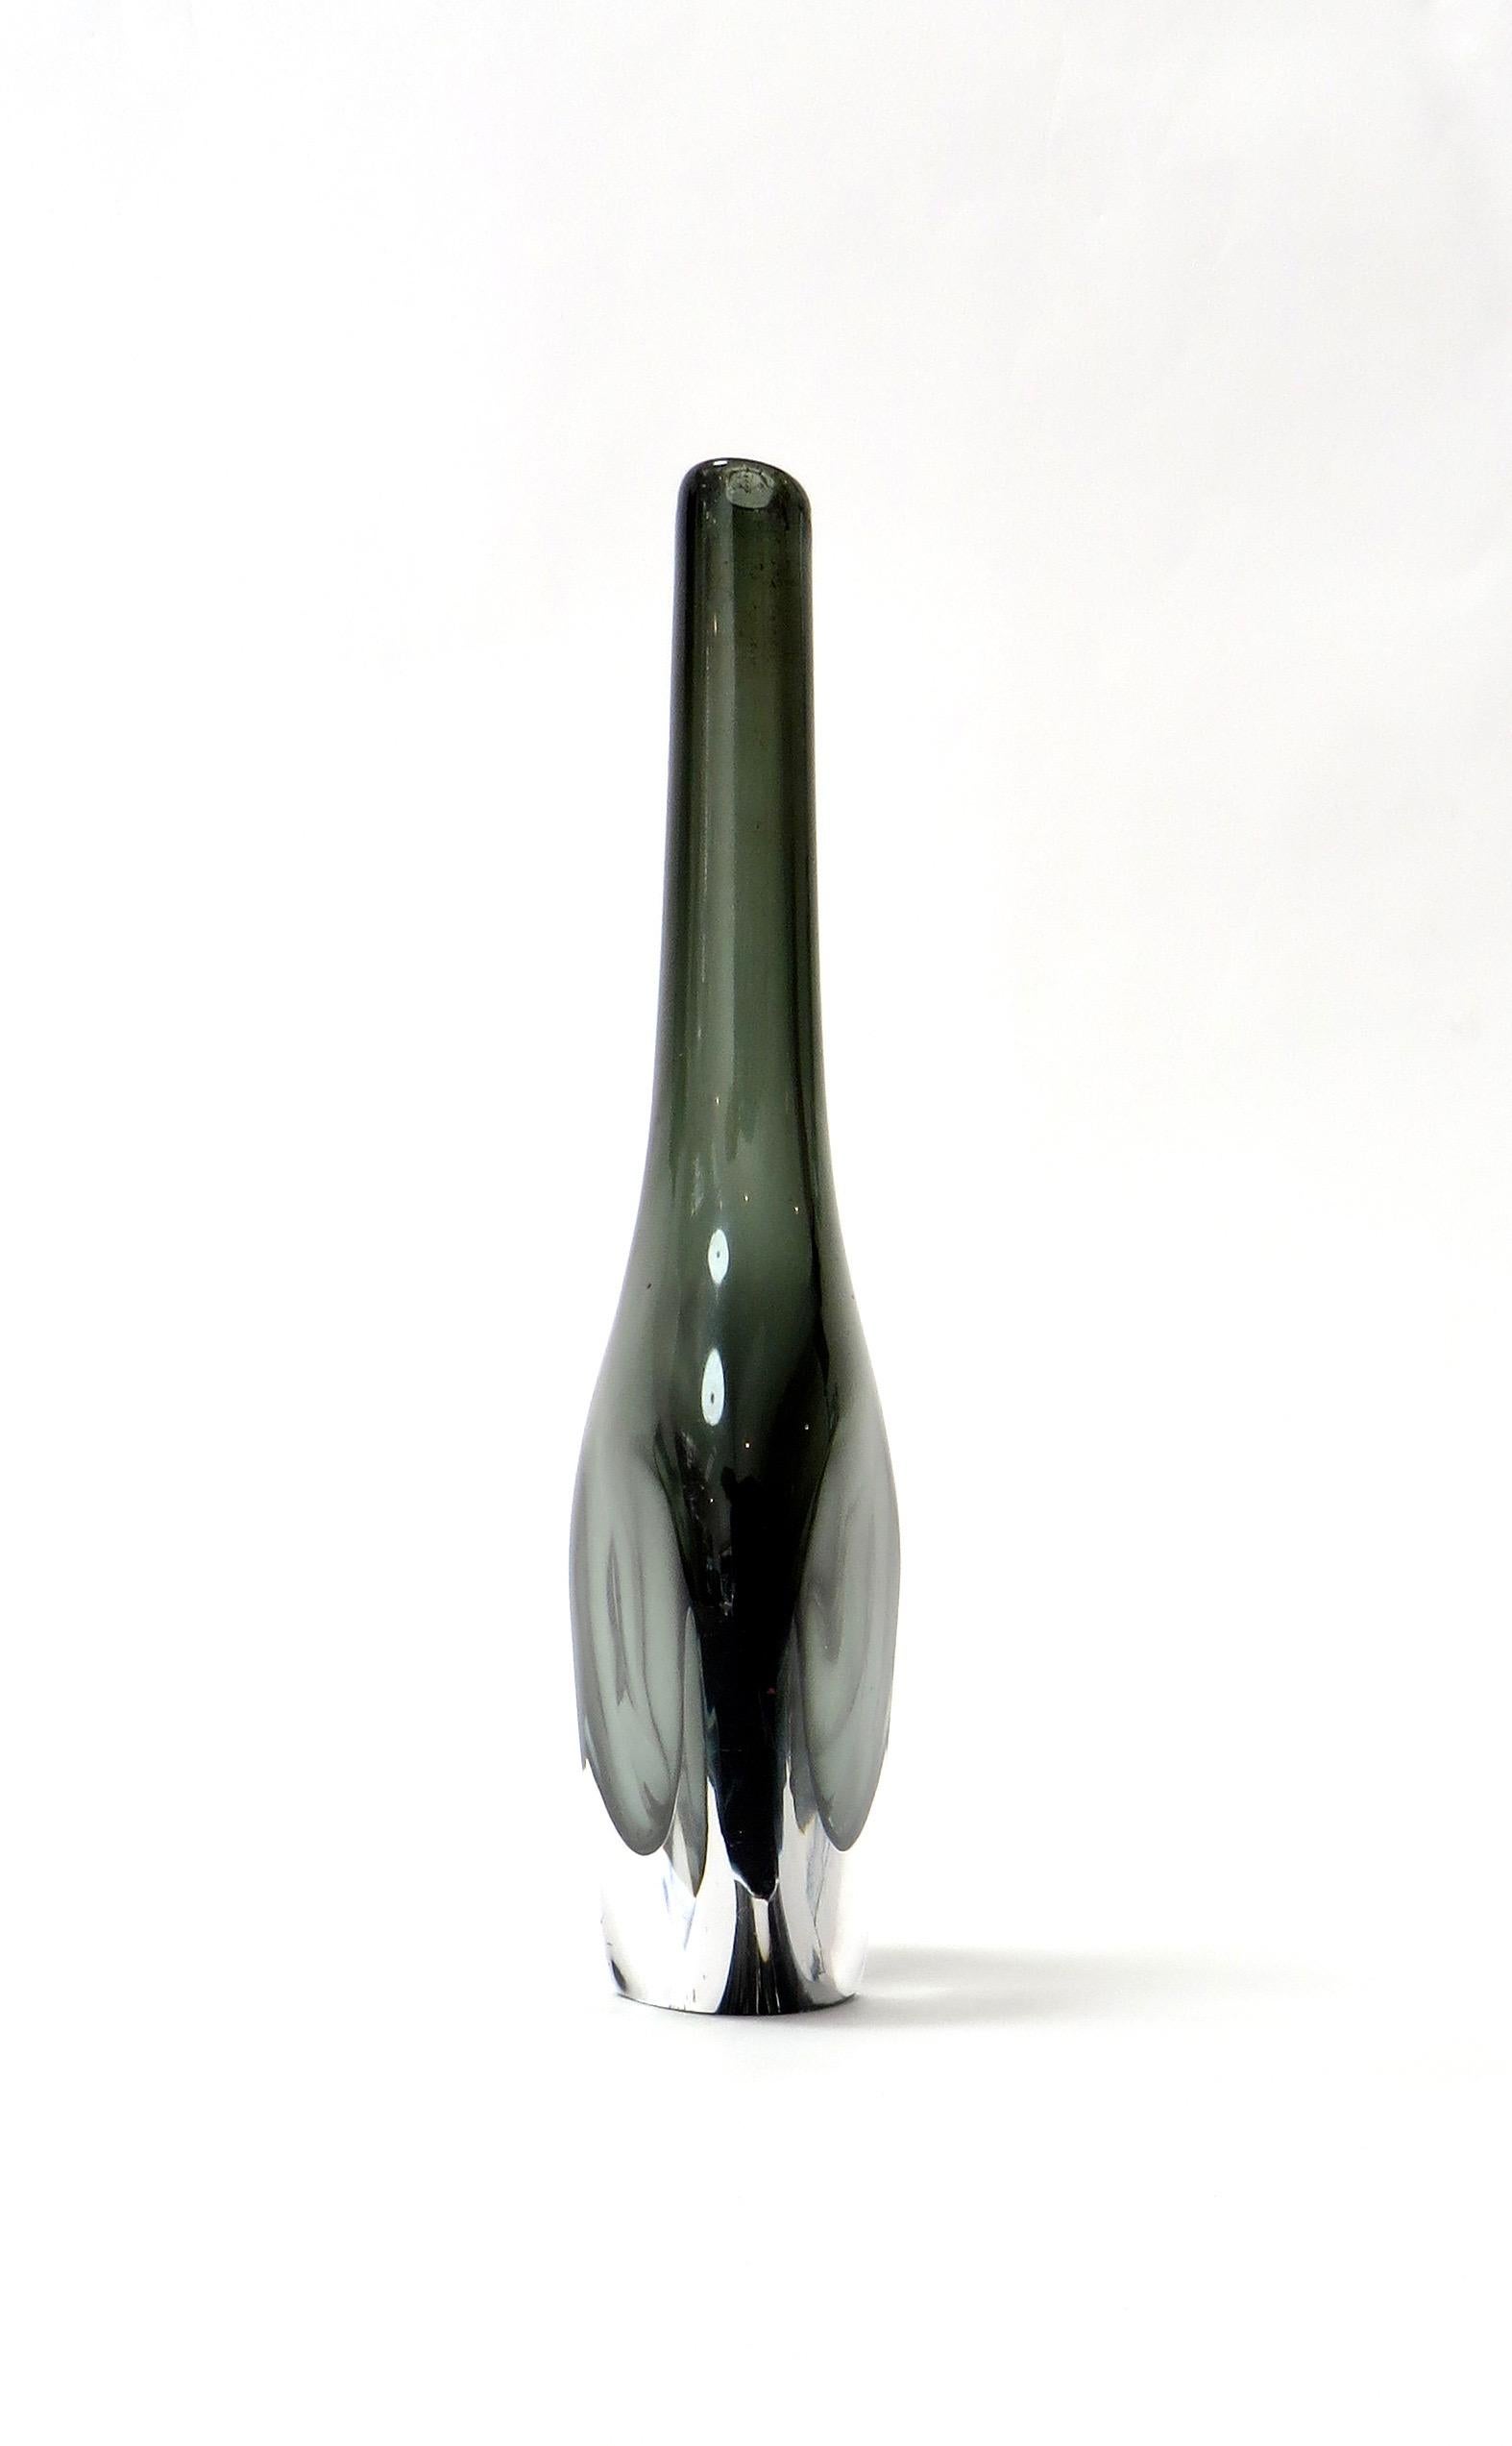 A Swedish vintage 'Sommerso' glass dusk vase by Nils Landberg for Orrefors, circa 1950s. The piece has a smoked charcoal interior, cased within a clear glass layer. Very good vintage condition, with age appropriate wear, including some scratches to